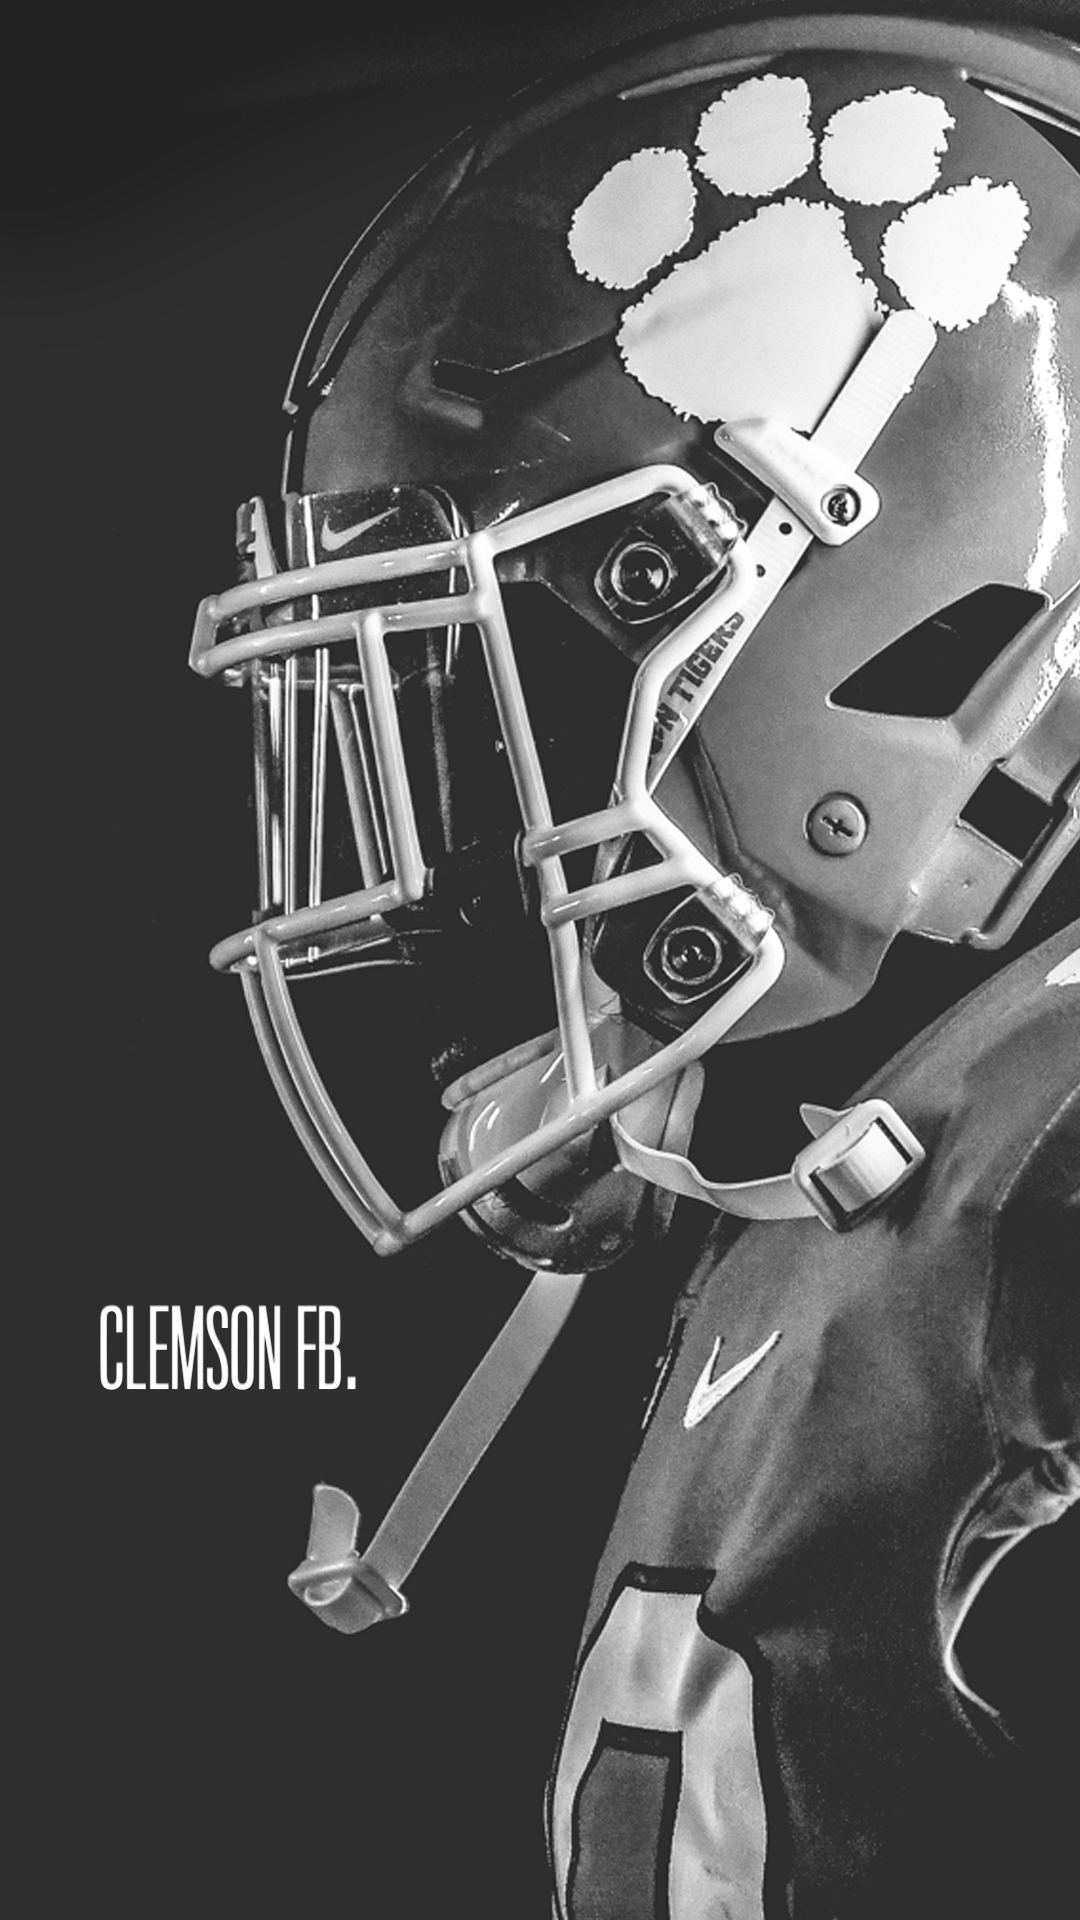 Black And White Football Wallpapers